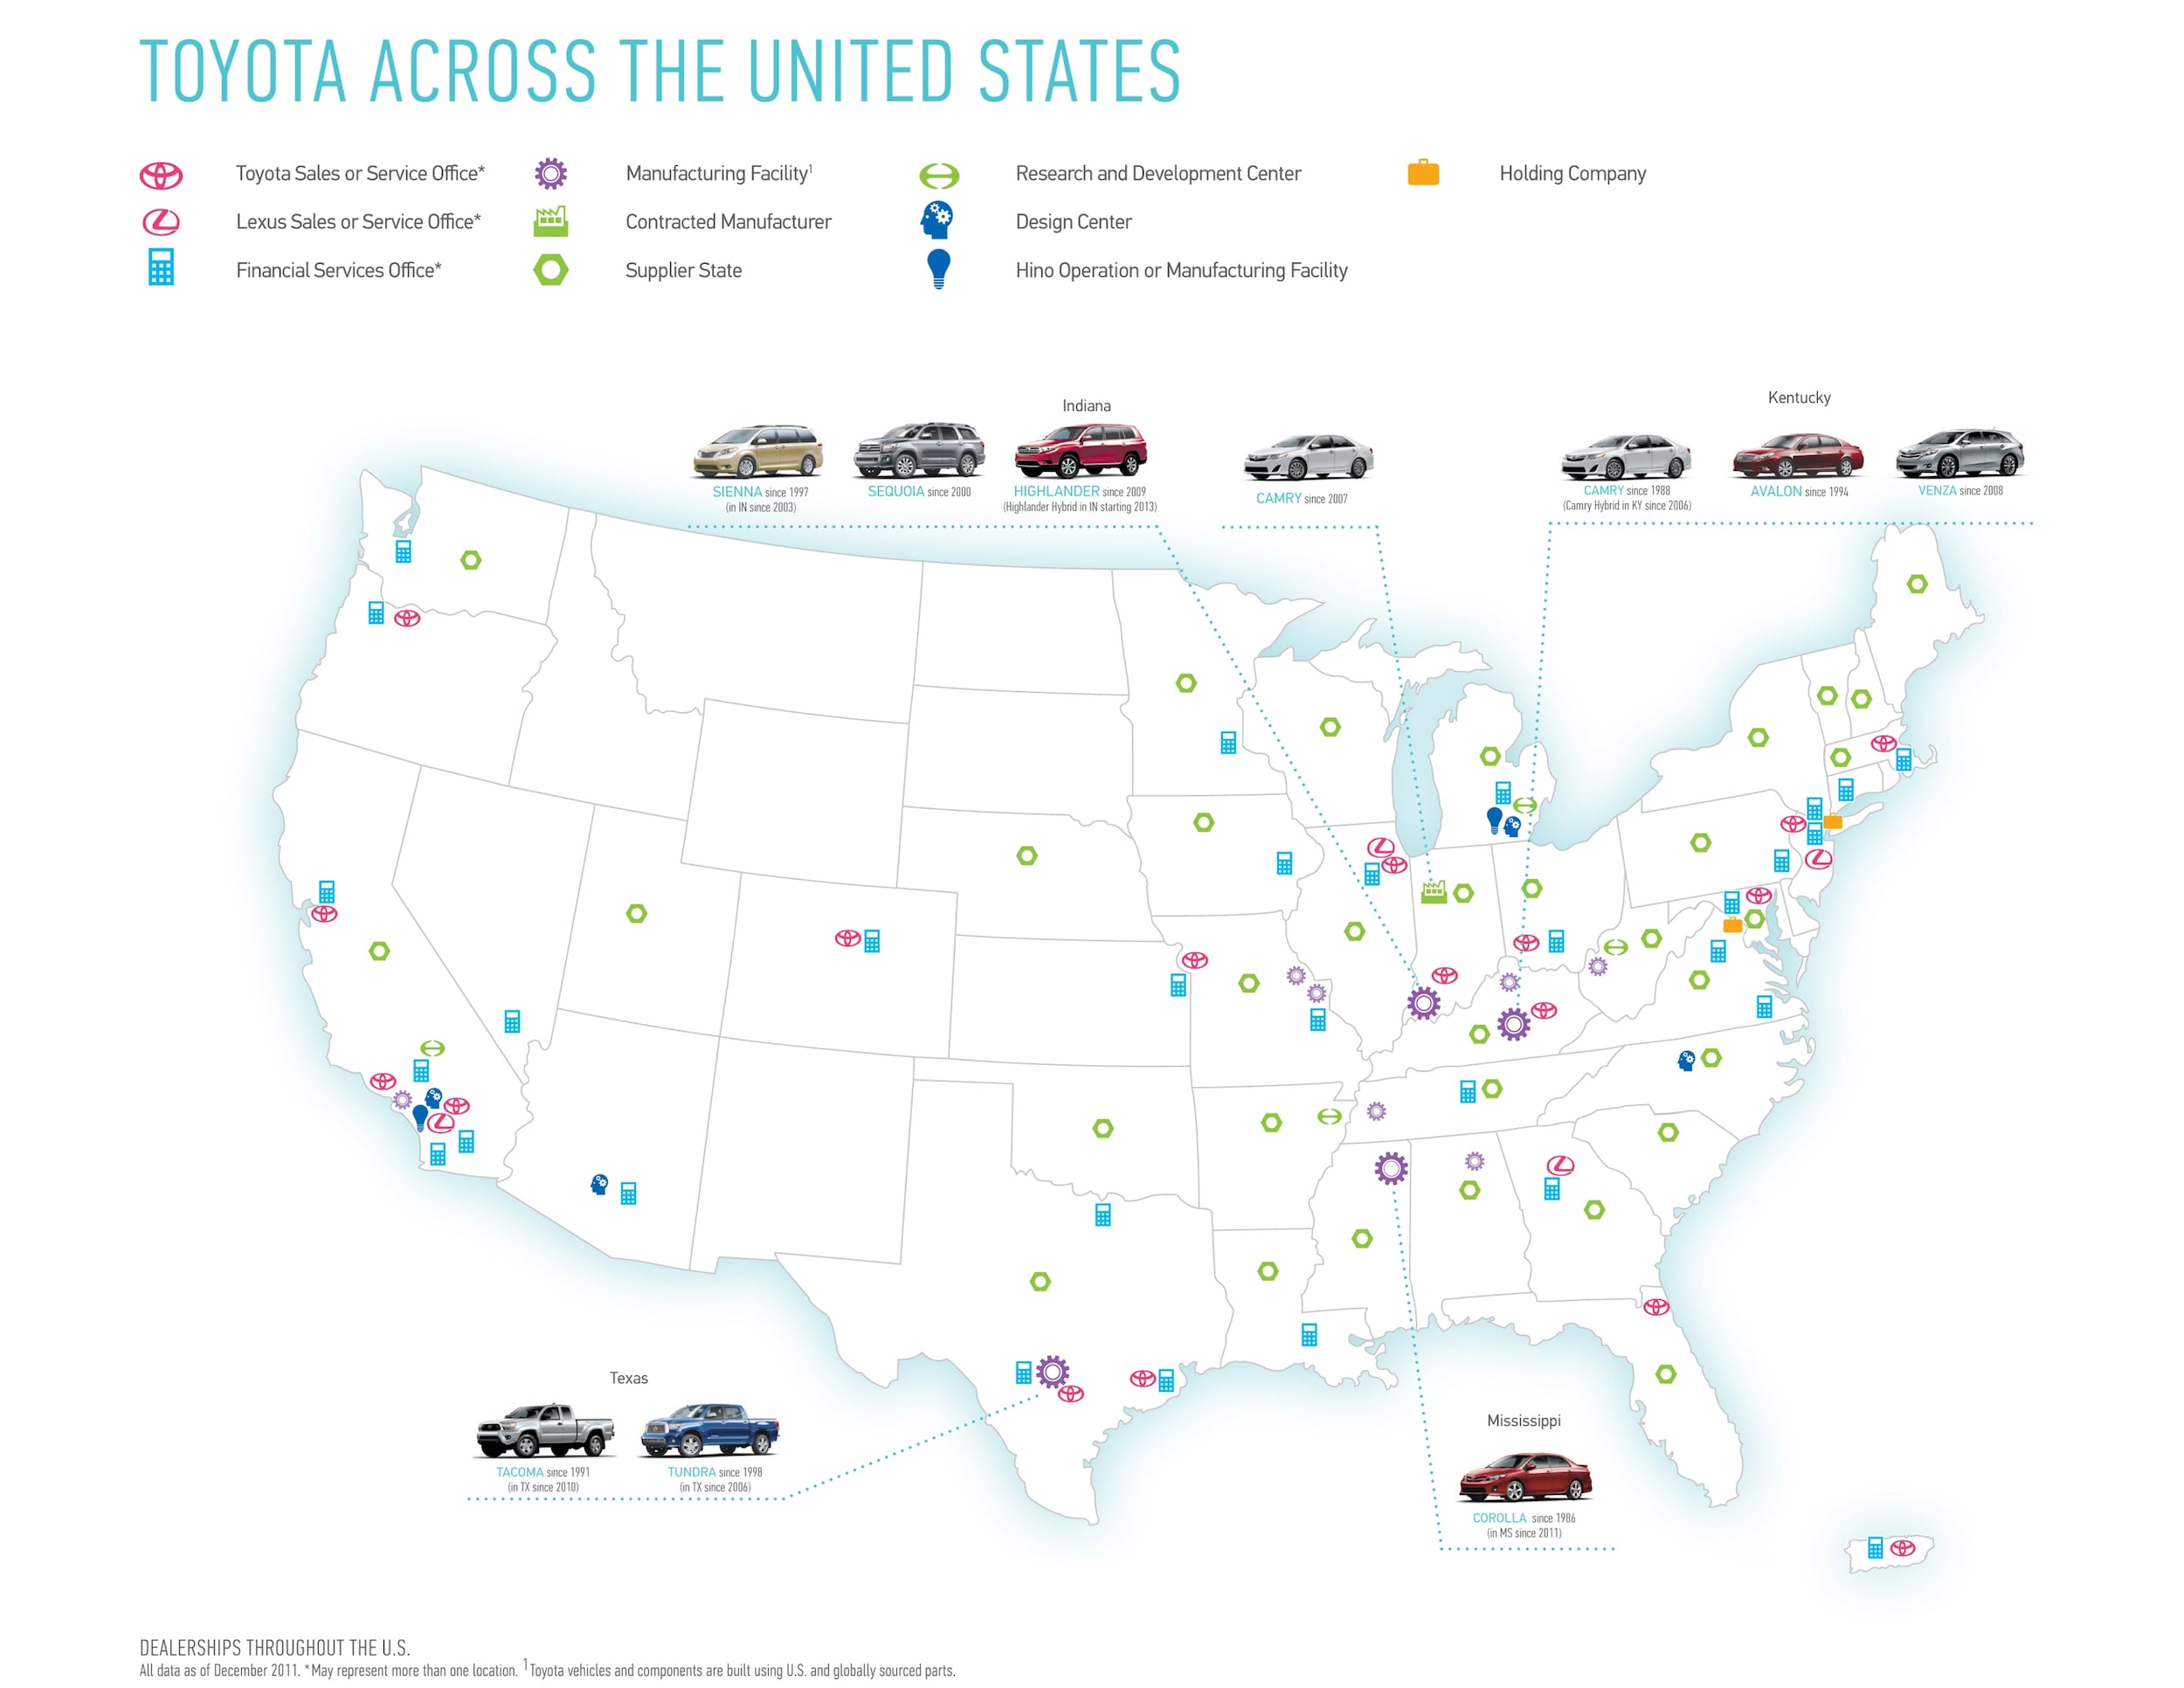 Toyota plants in the us